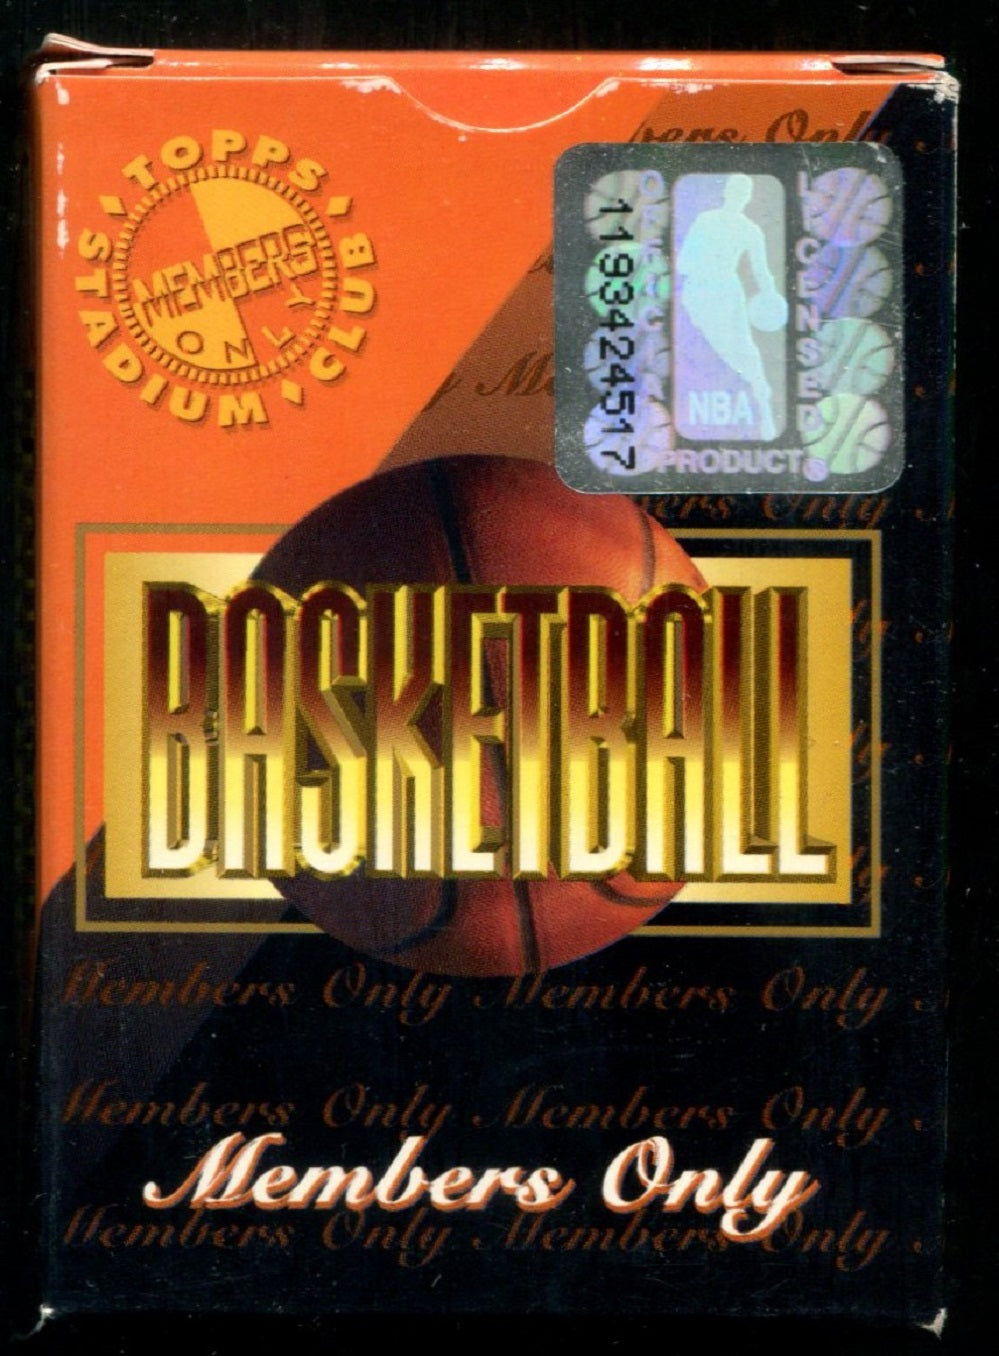 1996 Topps Stadium Club Basketball Members Only Factory Set (50)